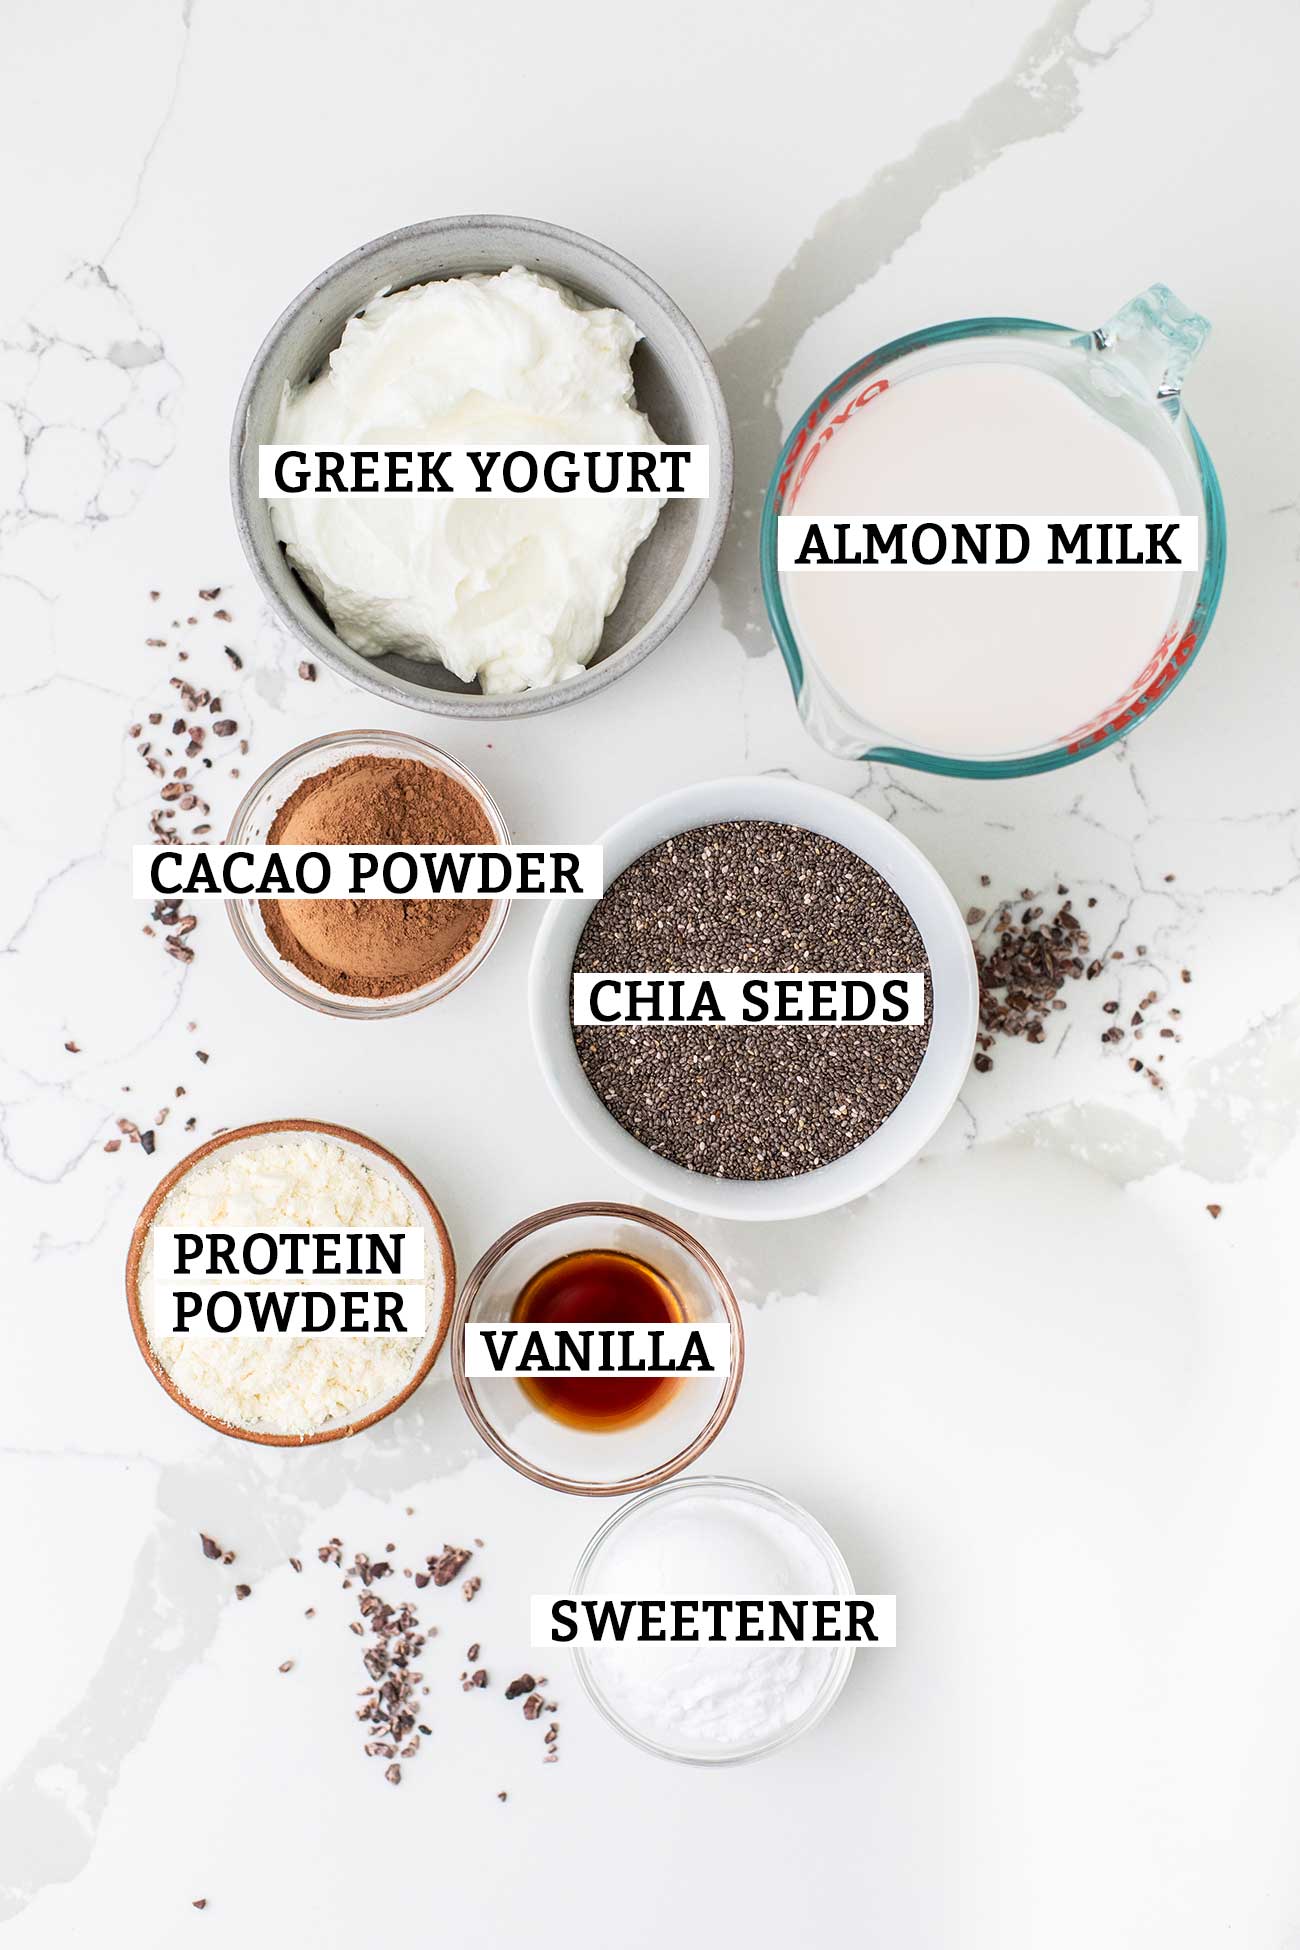 The ingredients needed to make a high protein chia seed pudding.